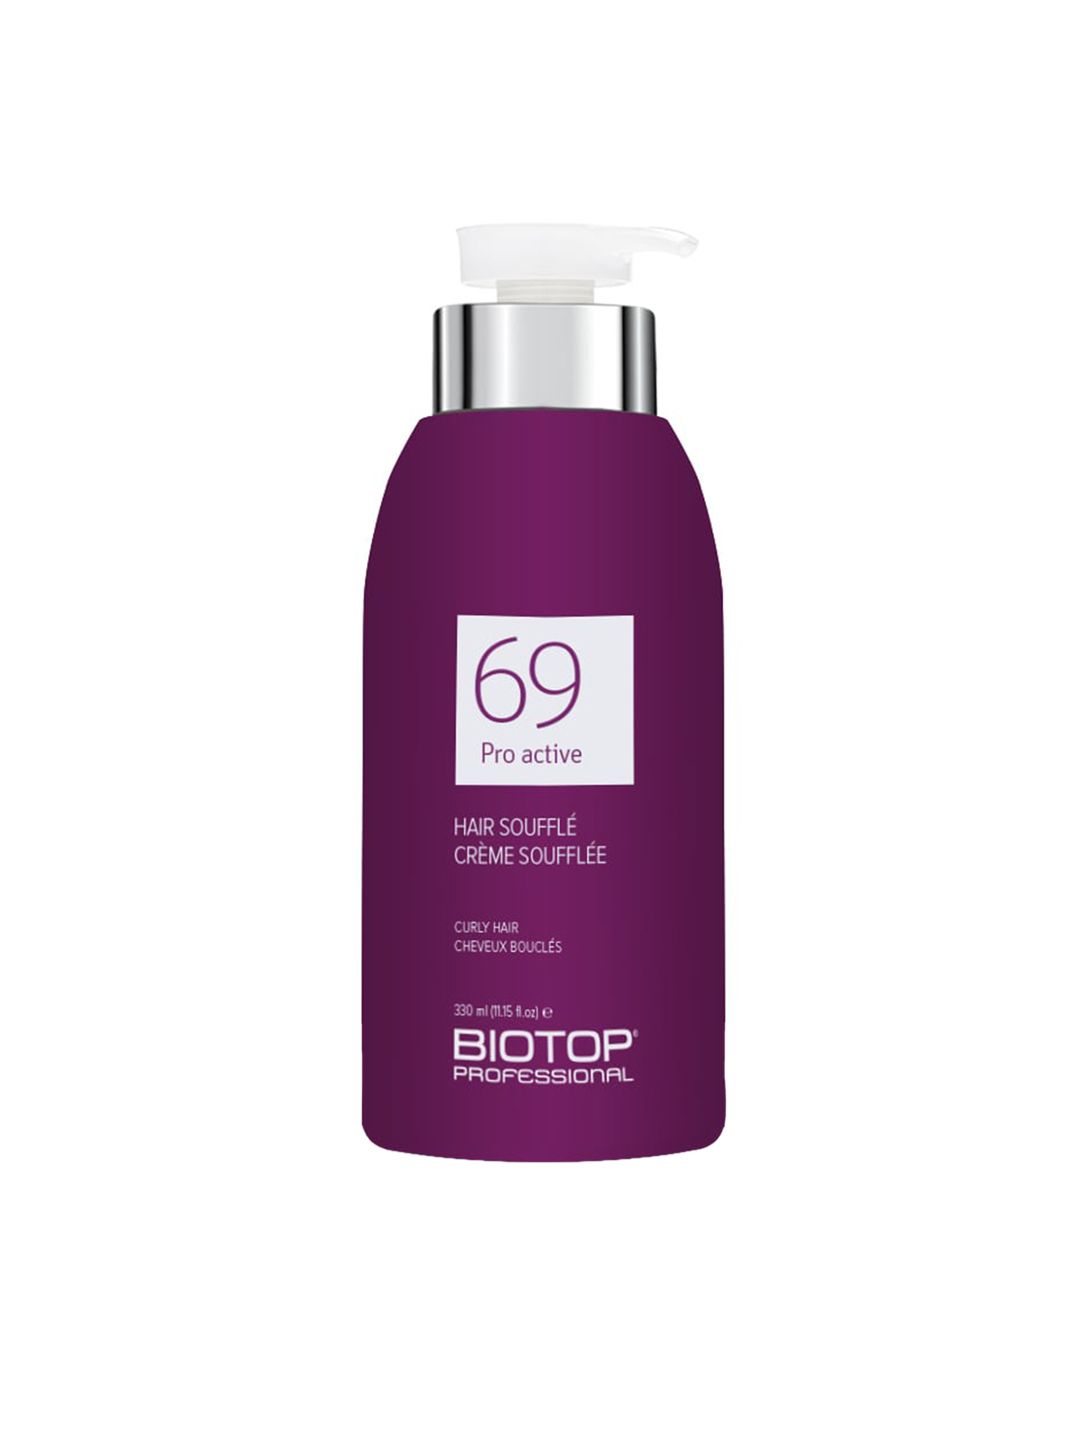 BIOTOP PROFESSIONAL 69 Pro Active Curly Hair Souffle - 330ml Price in India